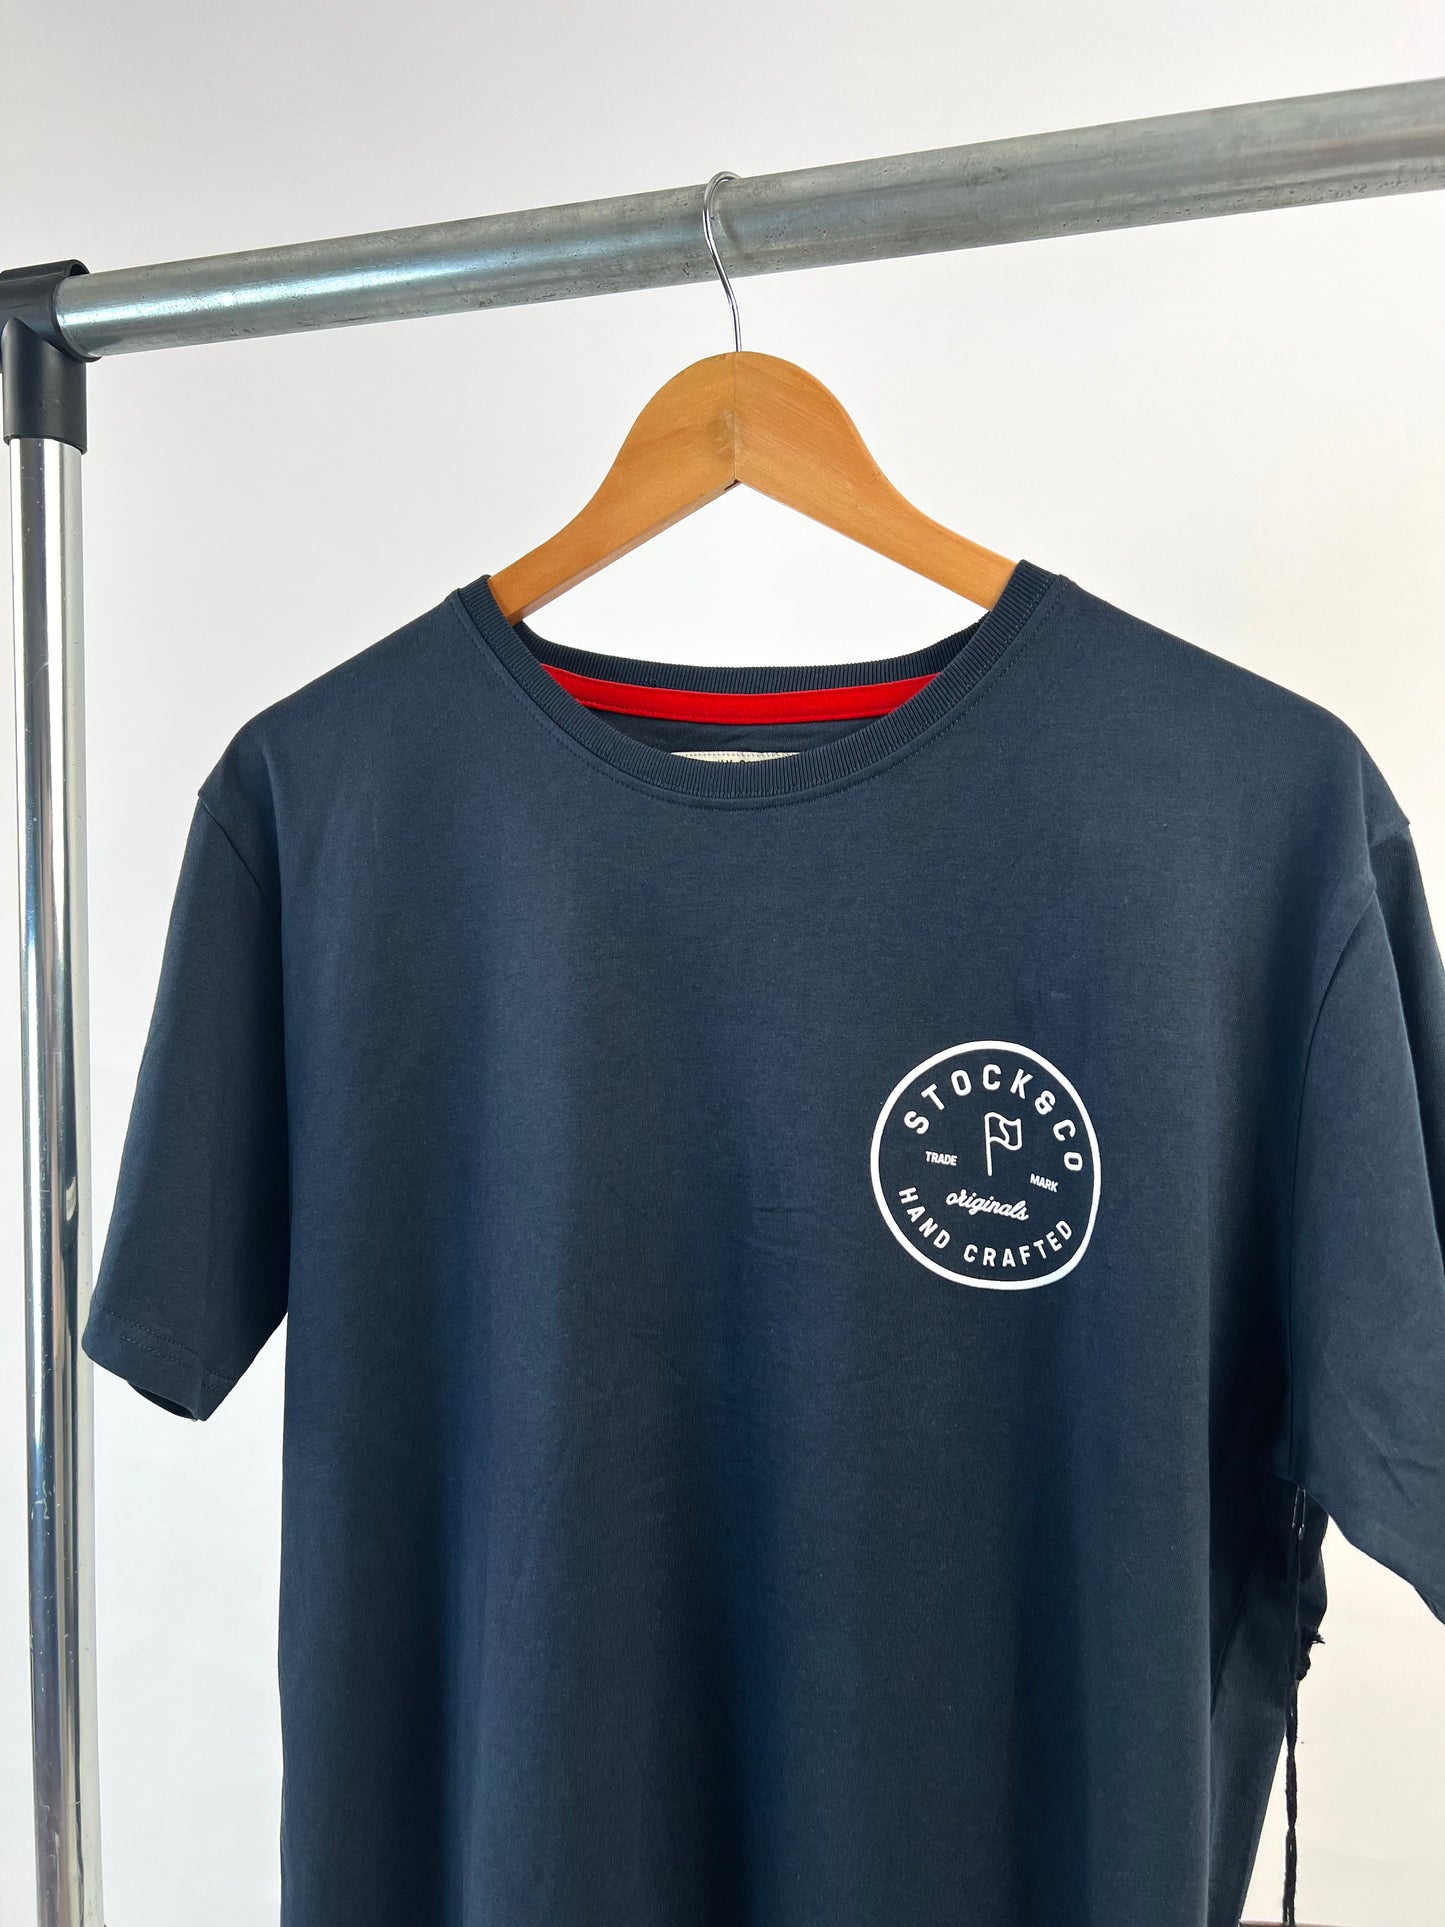 Stock & Co backprint t-shirt in blue